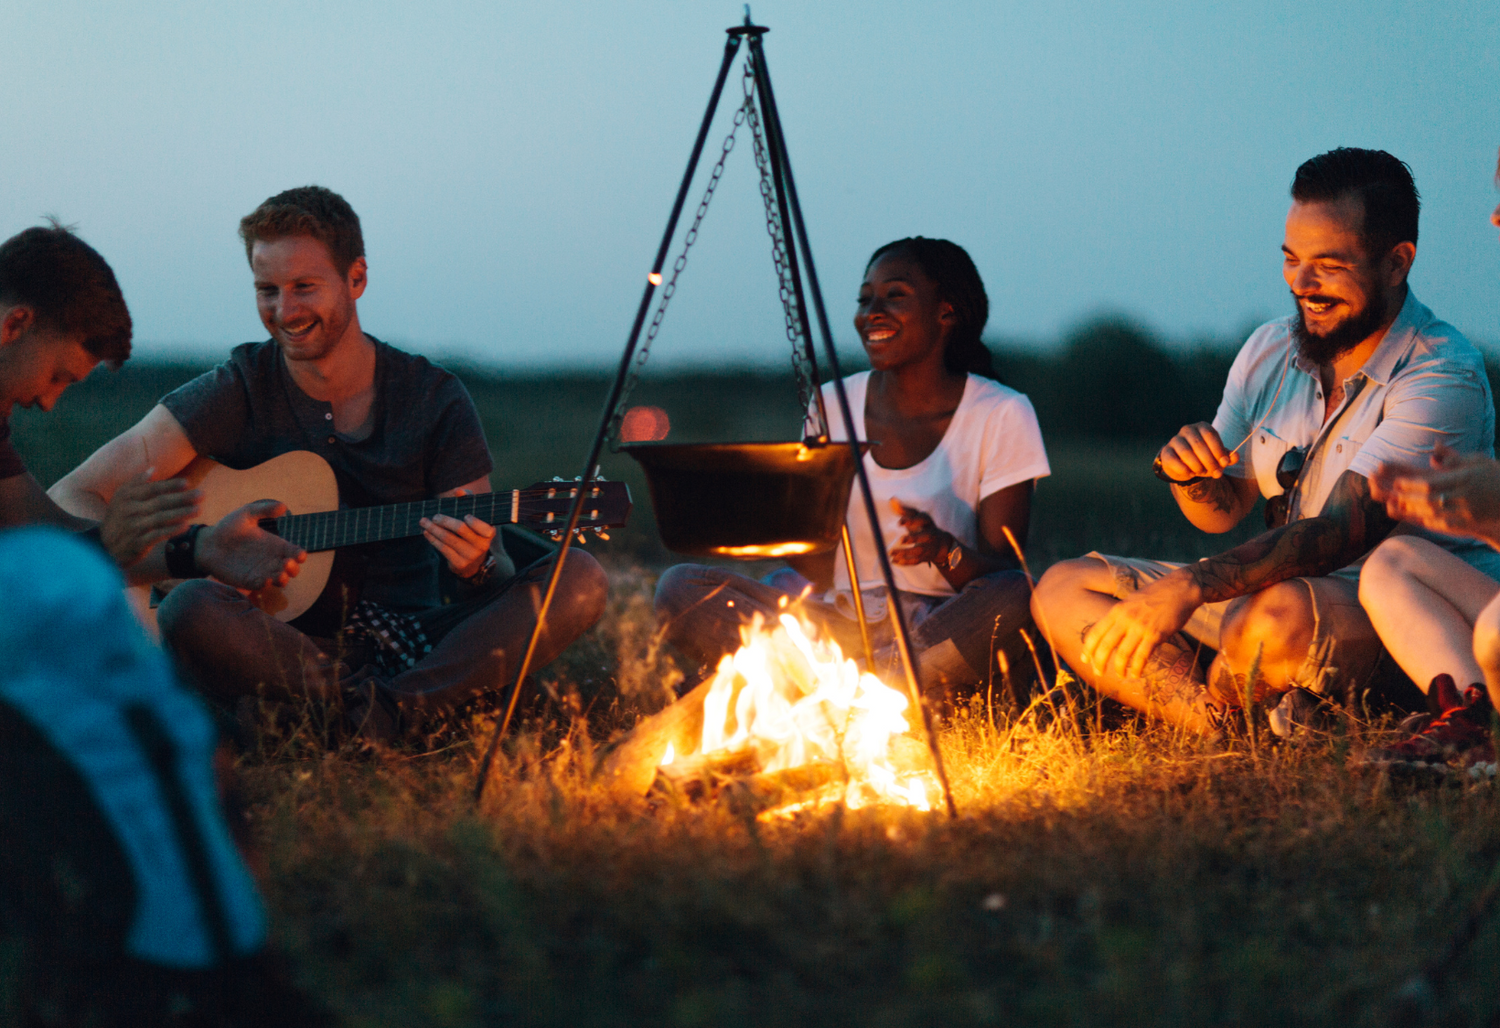 A group of friends sitting around a warm and cozy campfire, enjoying each other's company